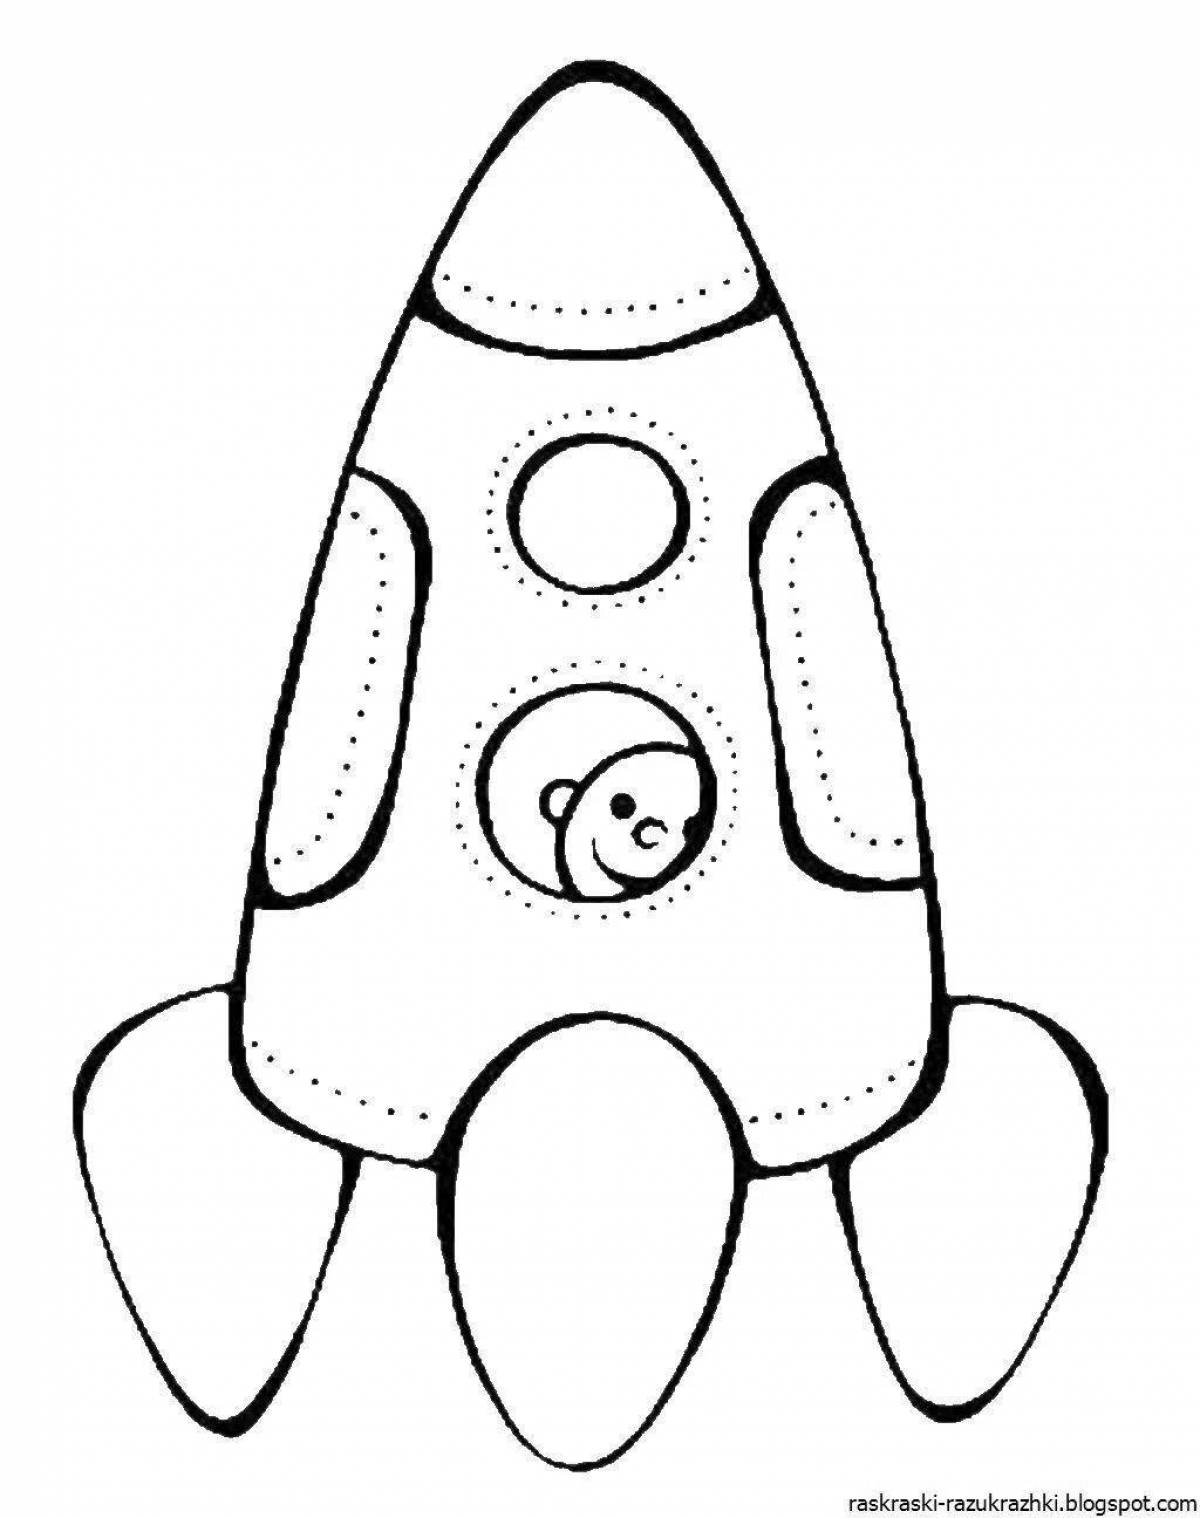 Rocket coloring book for 4-5 year olds